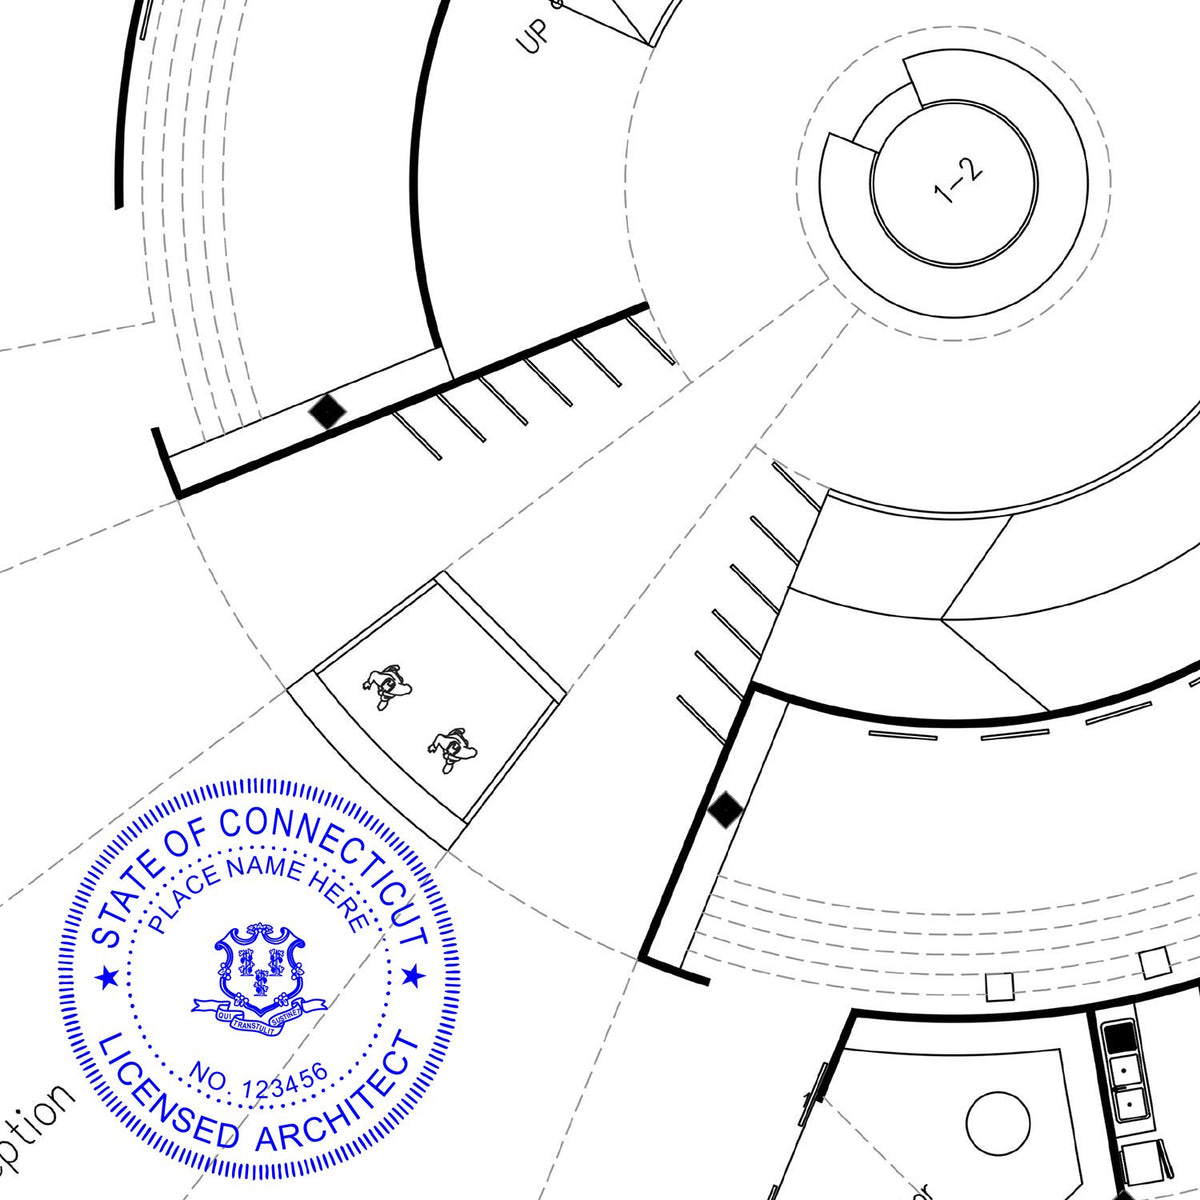 An alternative view of the Slim Pre-Inked Connecticut Architect Seal Stamp stamped on a sheet of paper showing the image in use